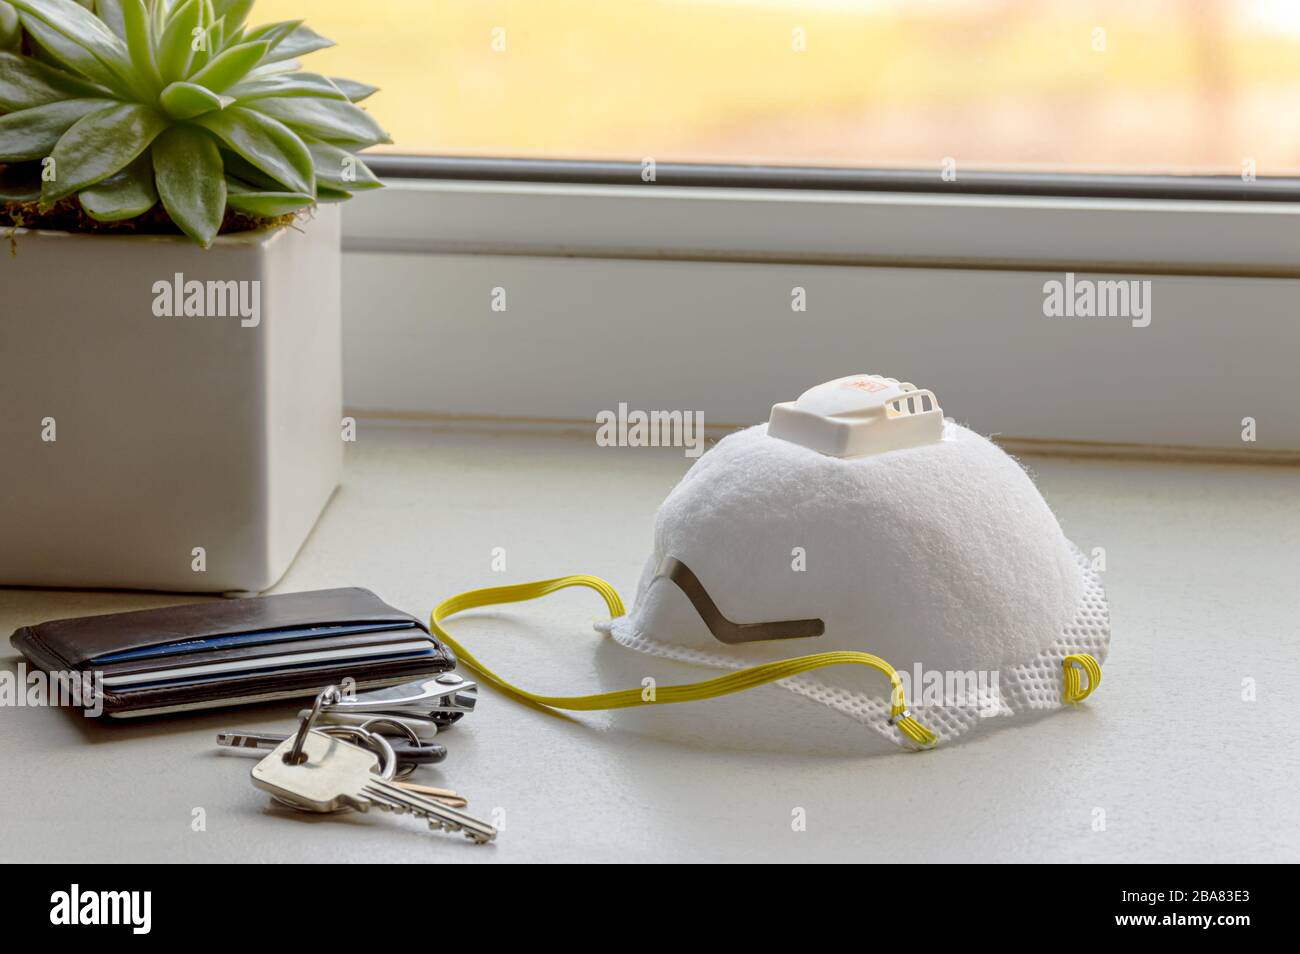 N95 Respirator Mask with keys and wallet on a counter at home. Personal Protective Equipment. Stock Photo